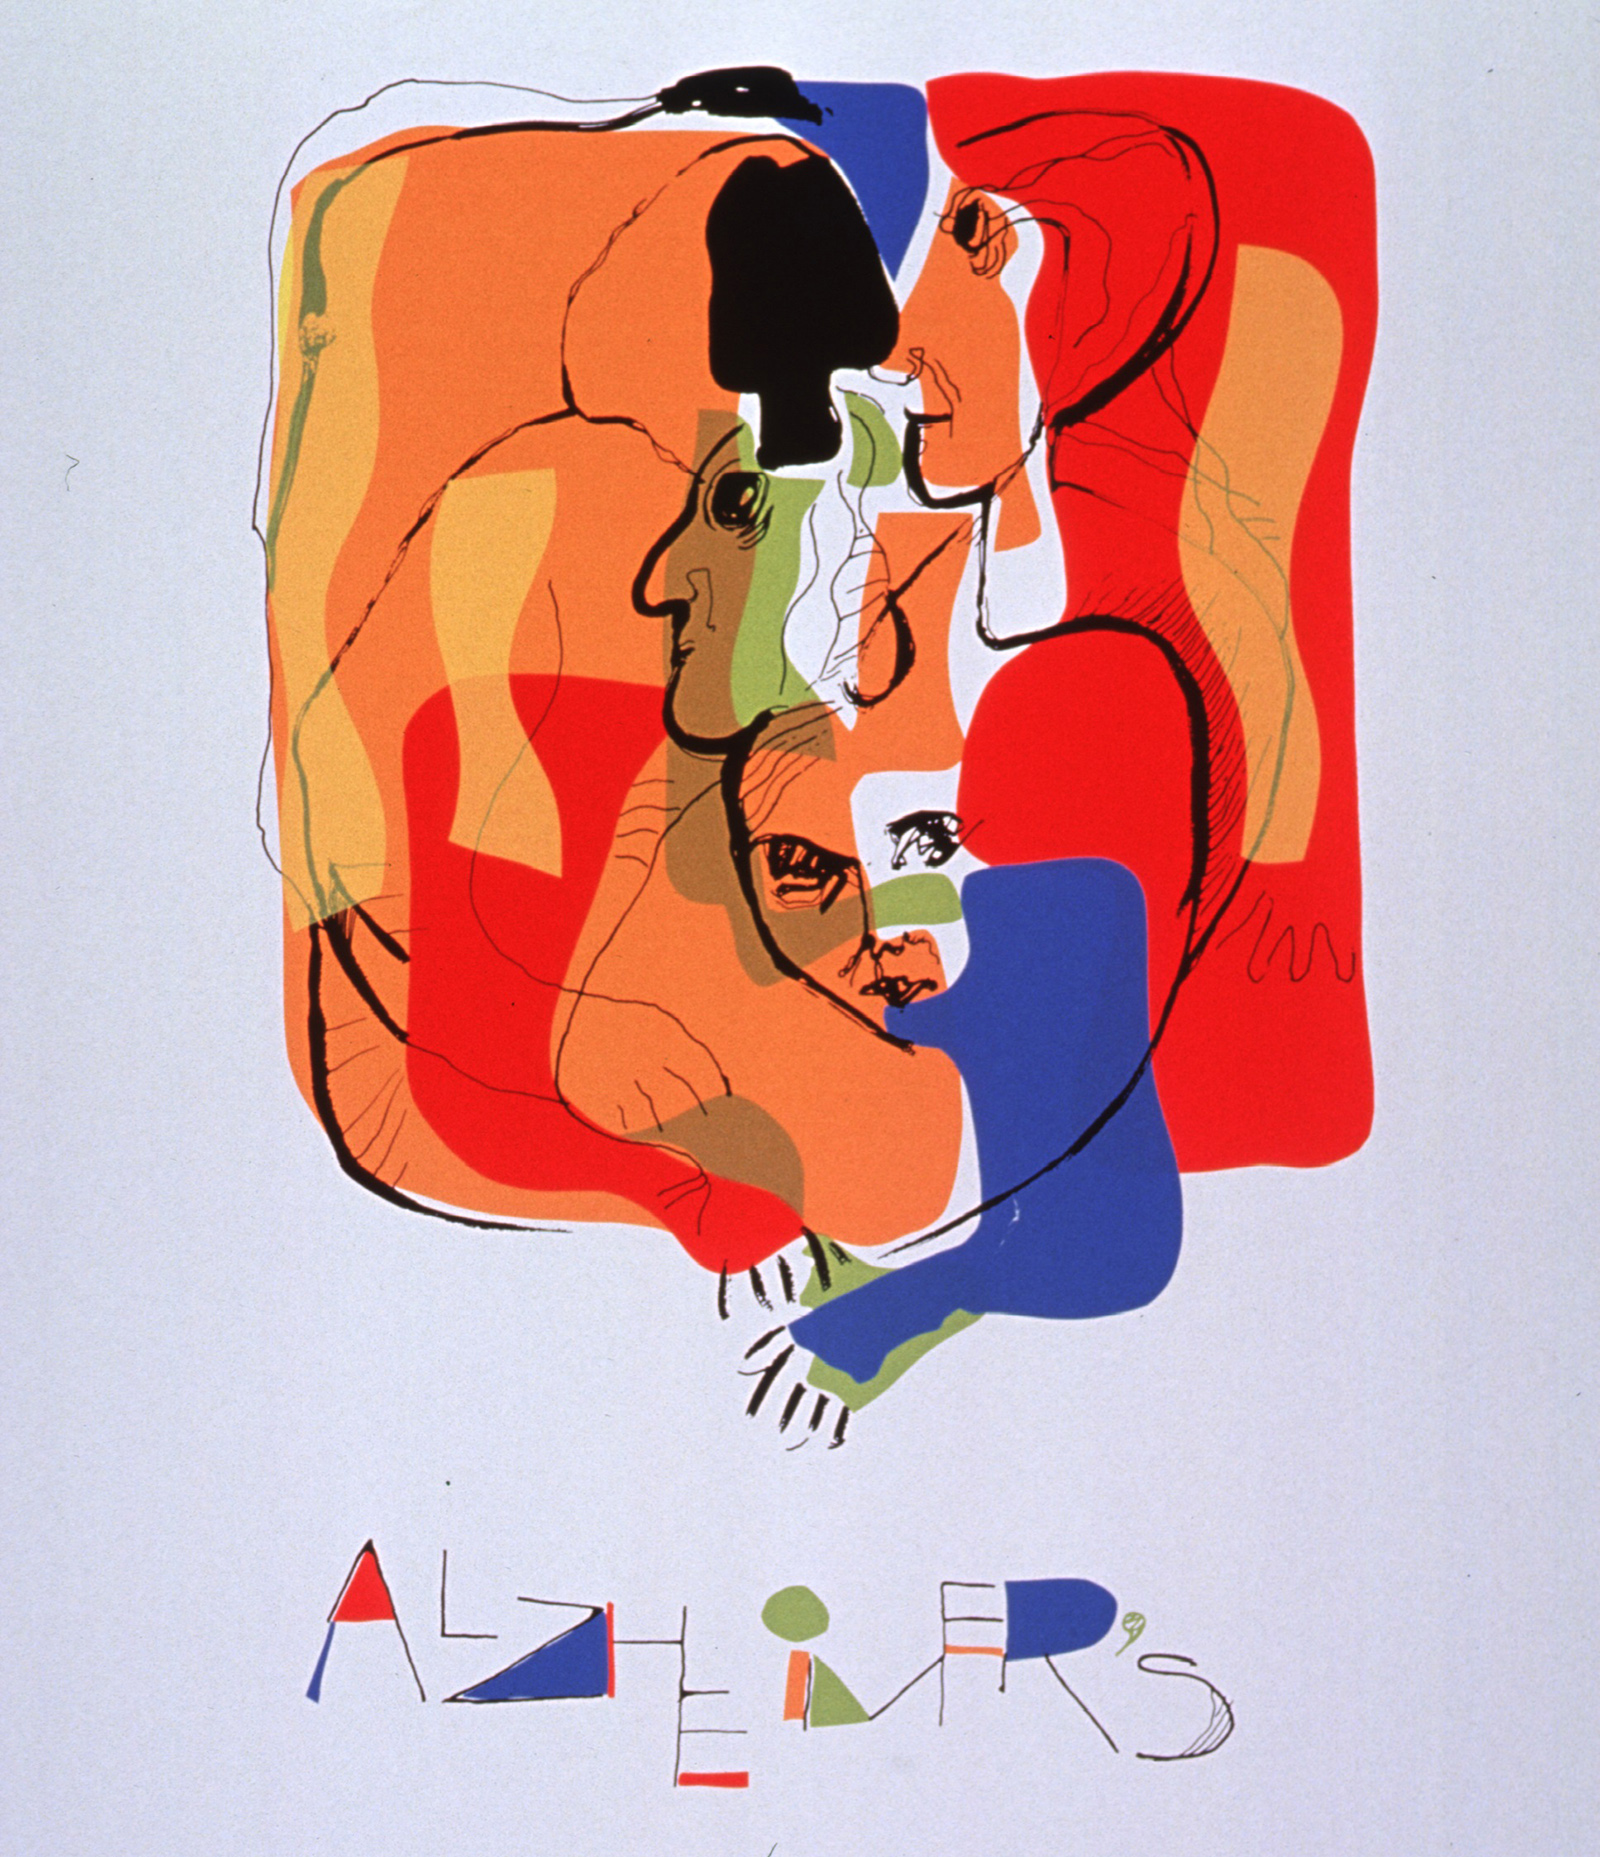 A brightly colored abstract including various faces and arms mingled together with the word ALZHEIMER'S in colorful abstract at the bottom.